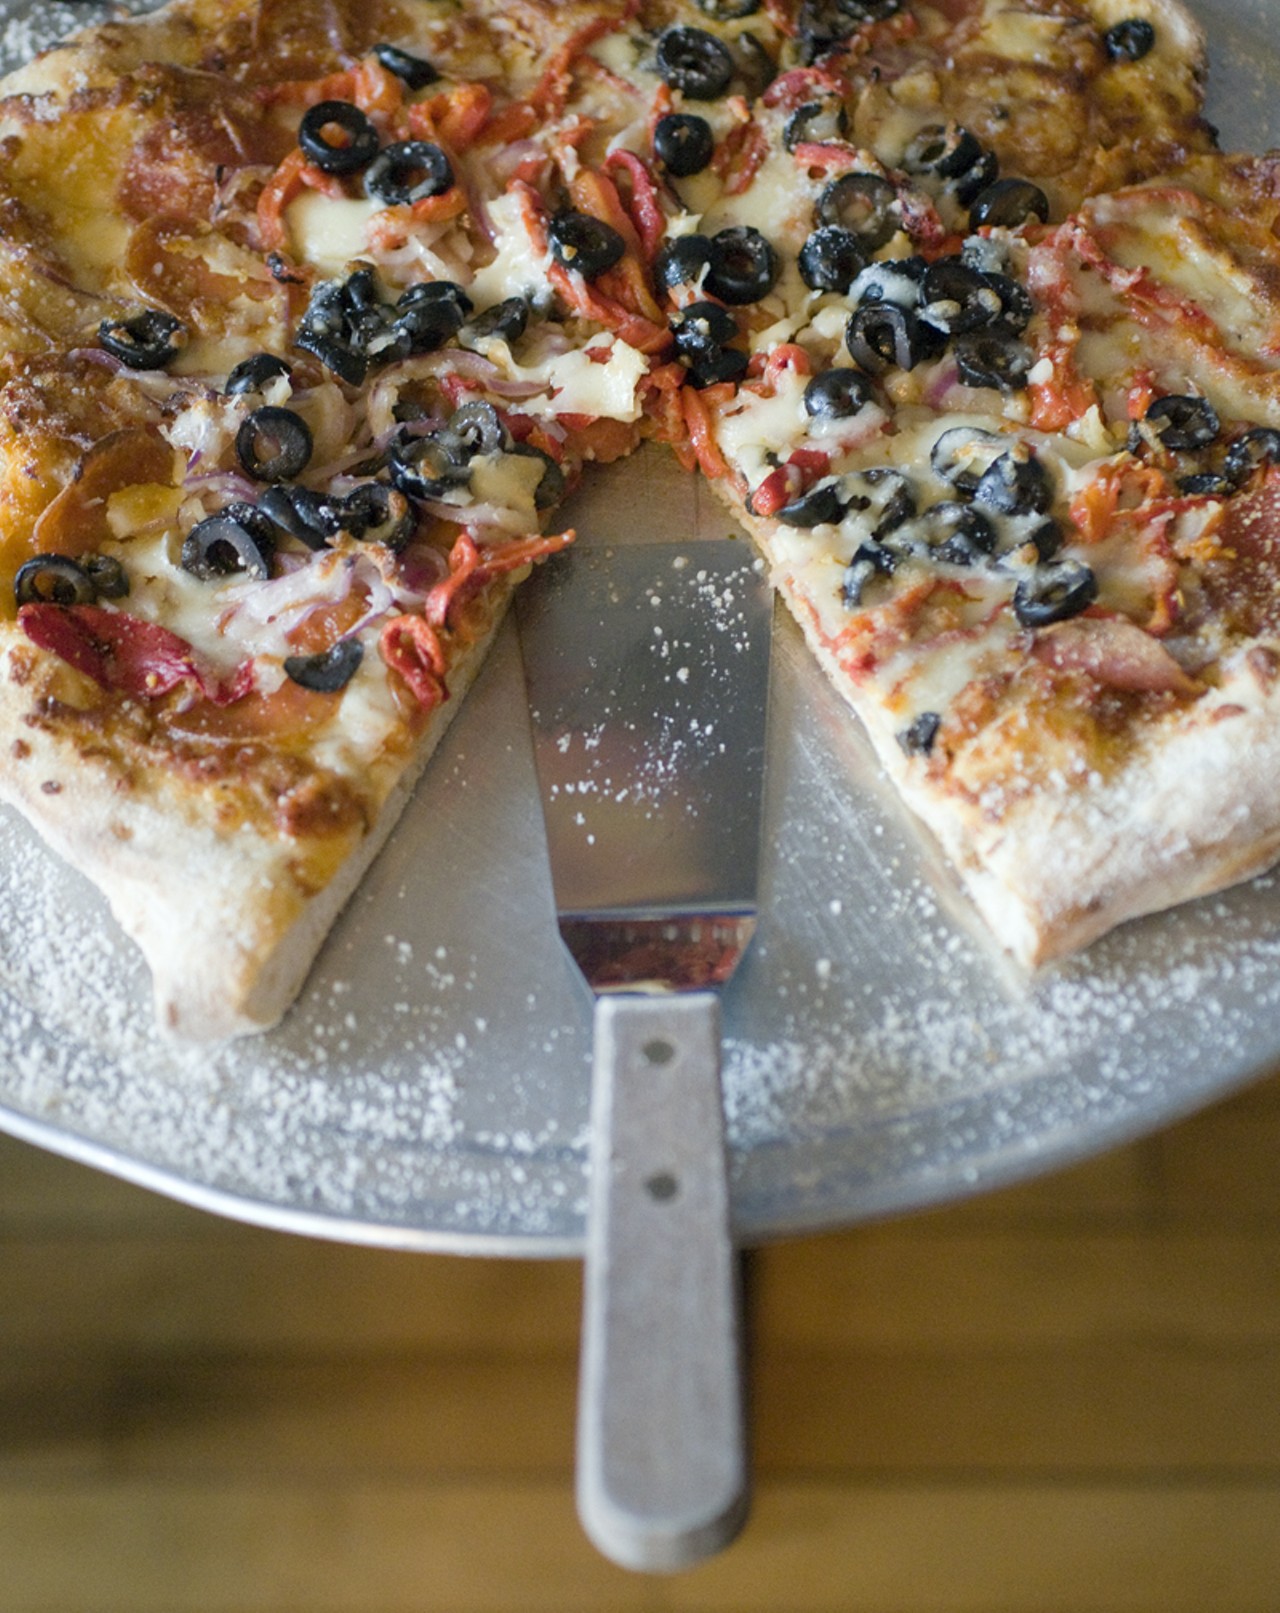 The pizza supreme is made with mozzarella cheese, black olives, roasted peppers, red onions and pepperoni.